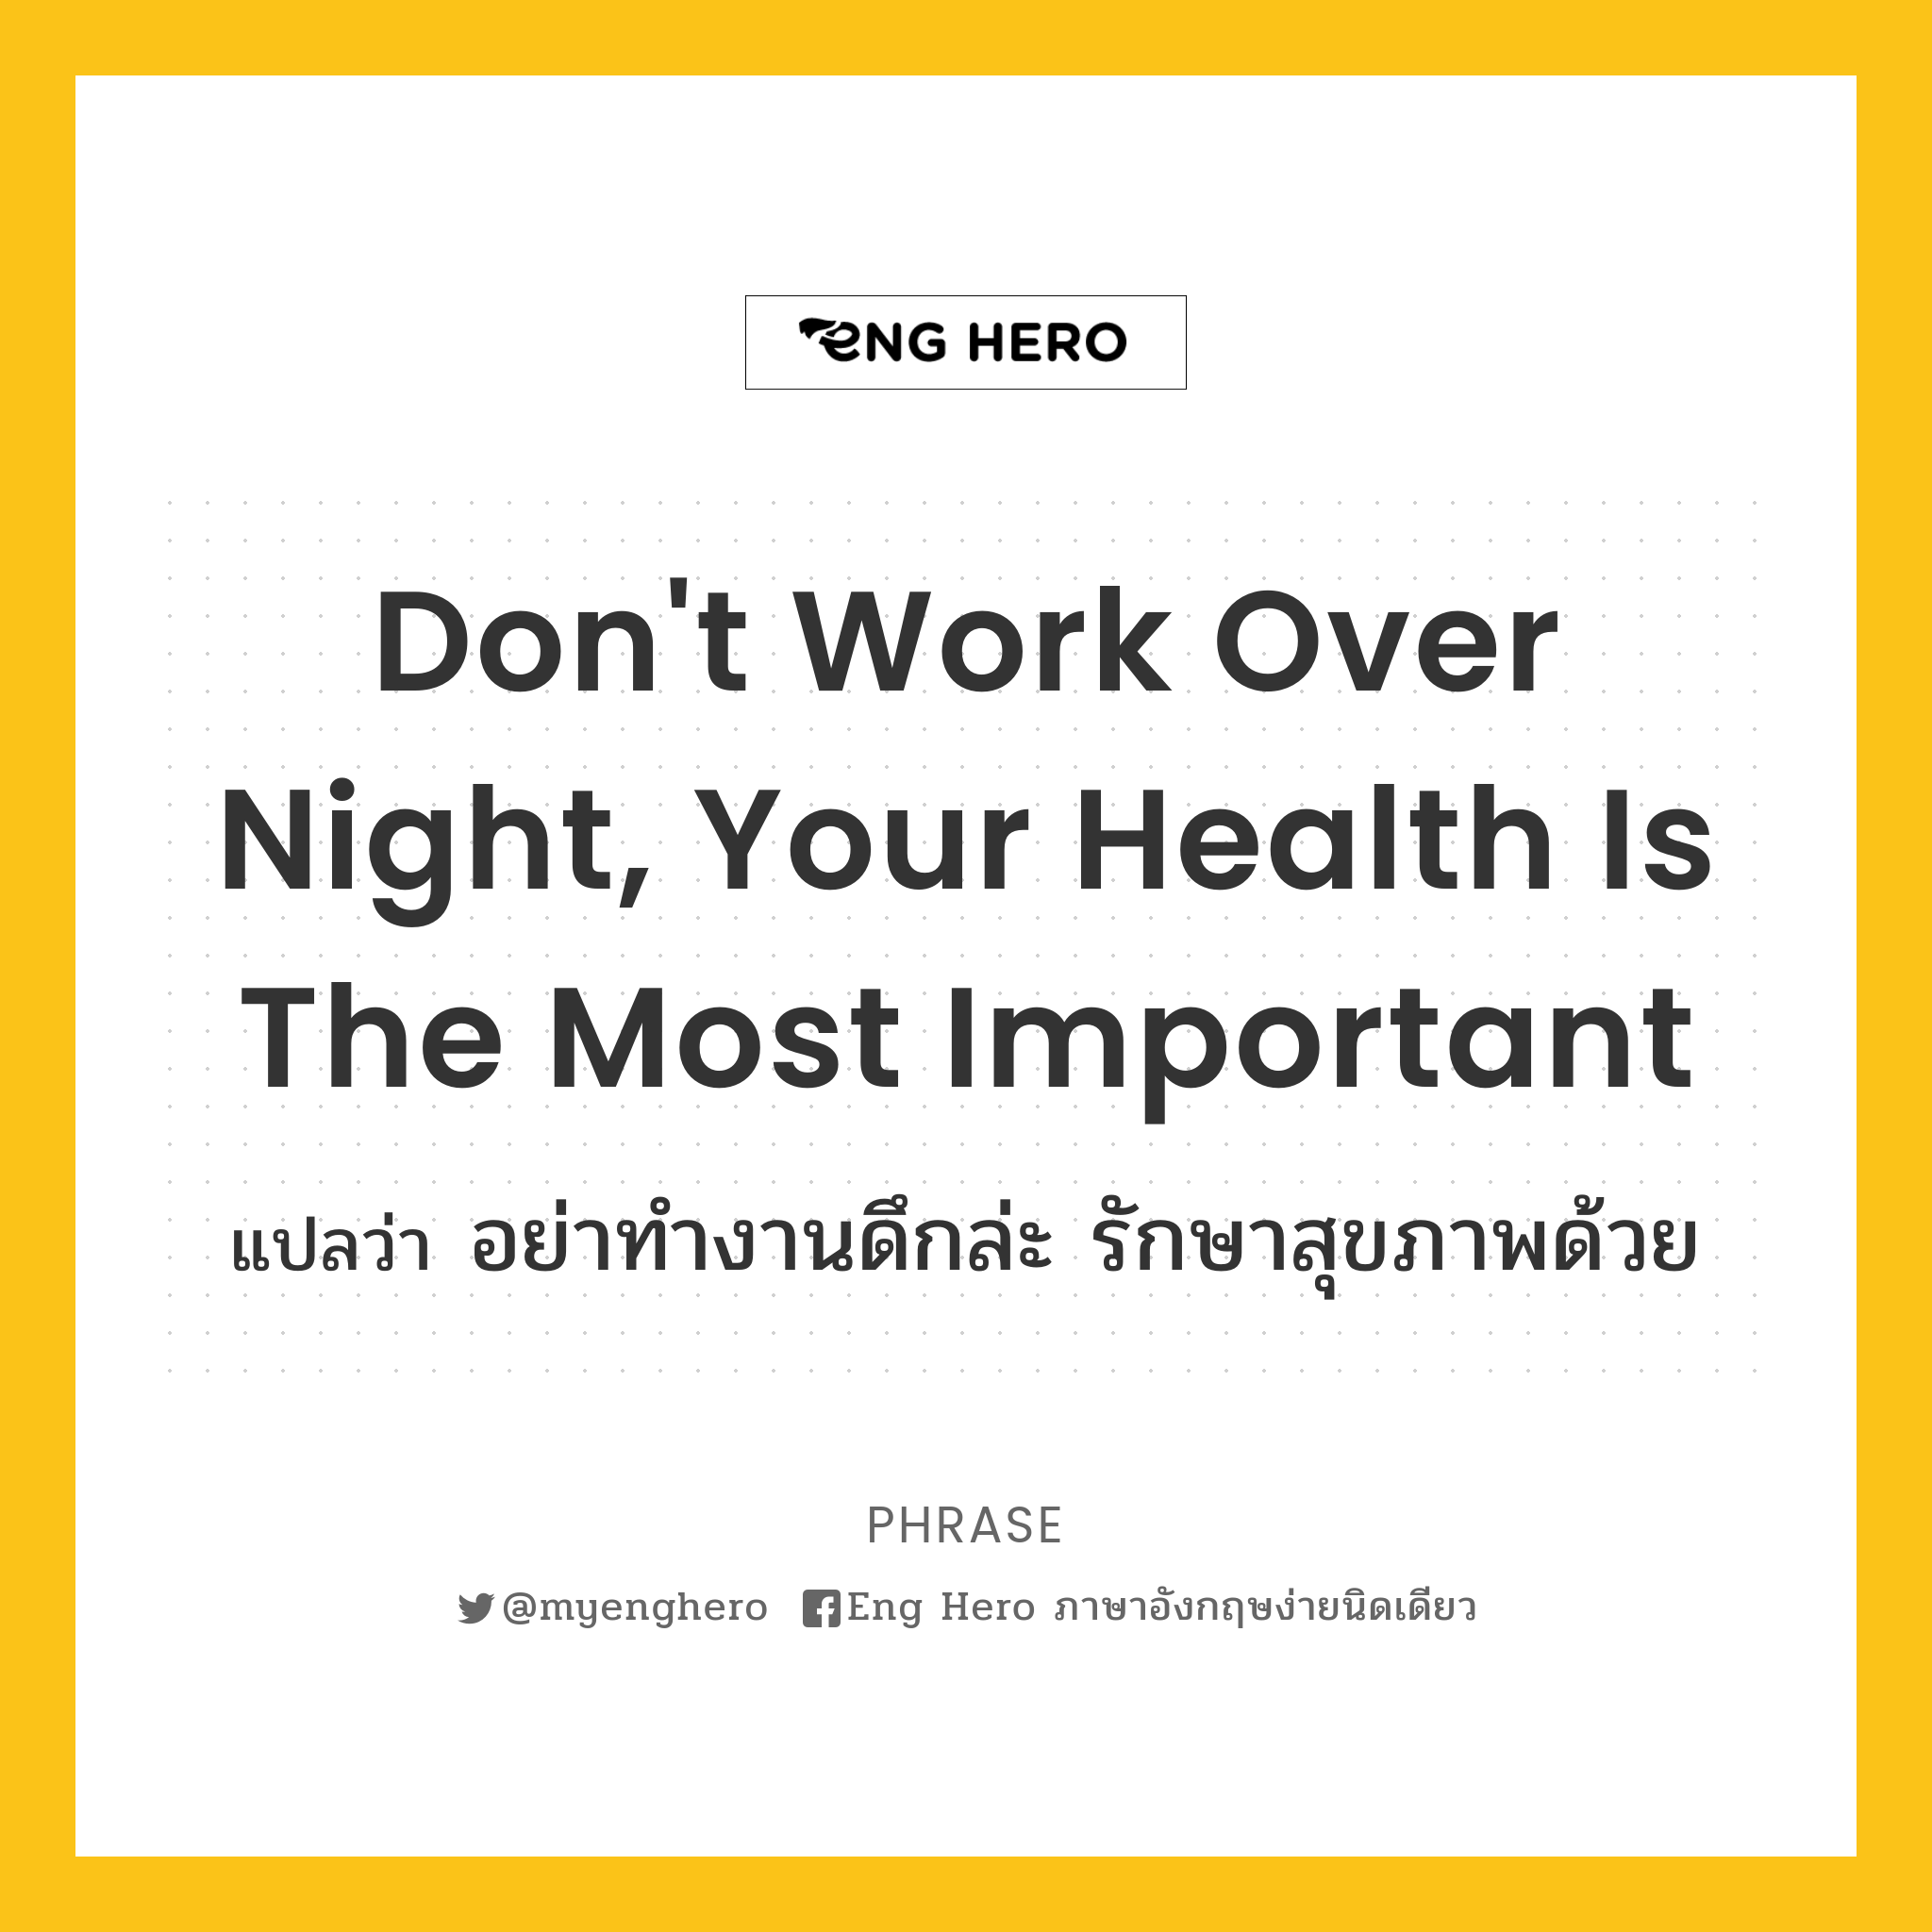 Don't work over night, Your health is the most important